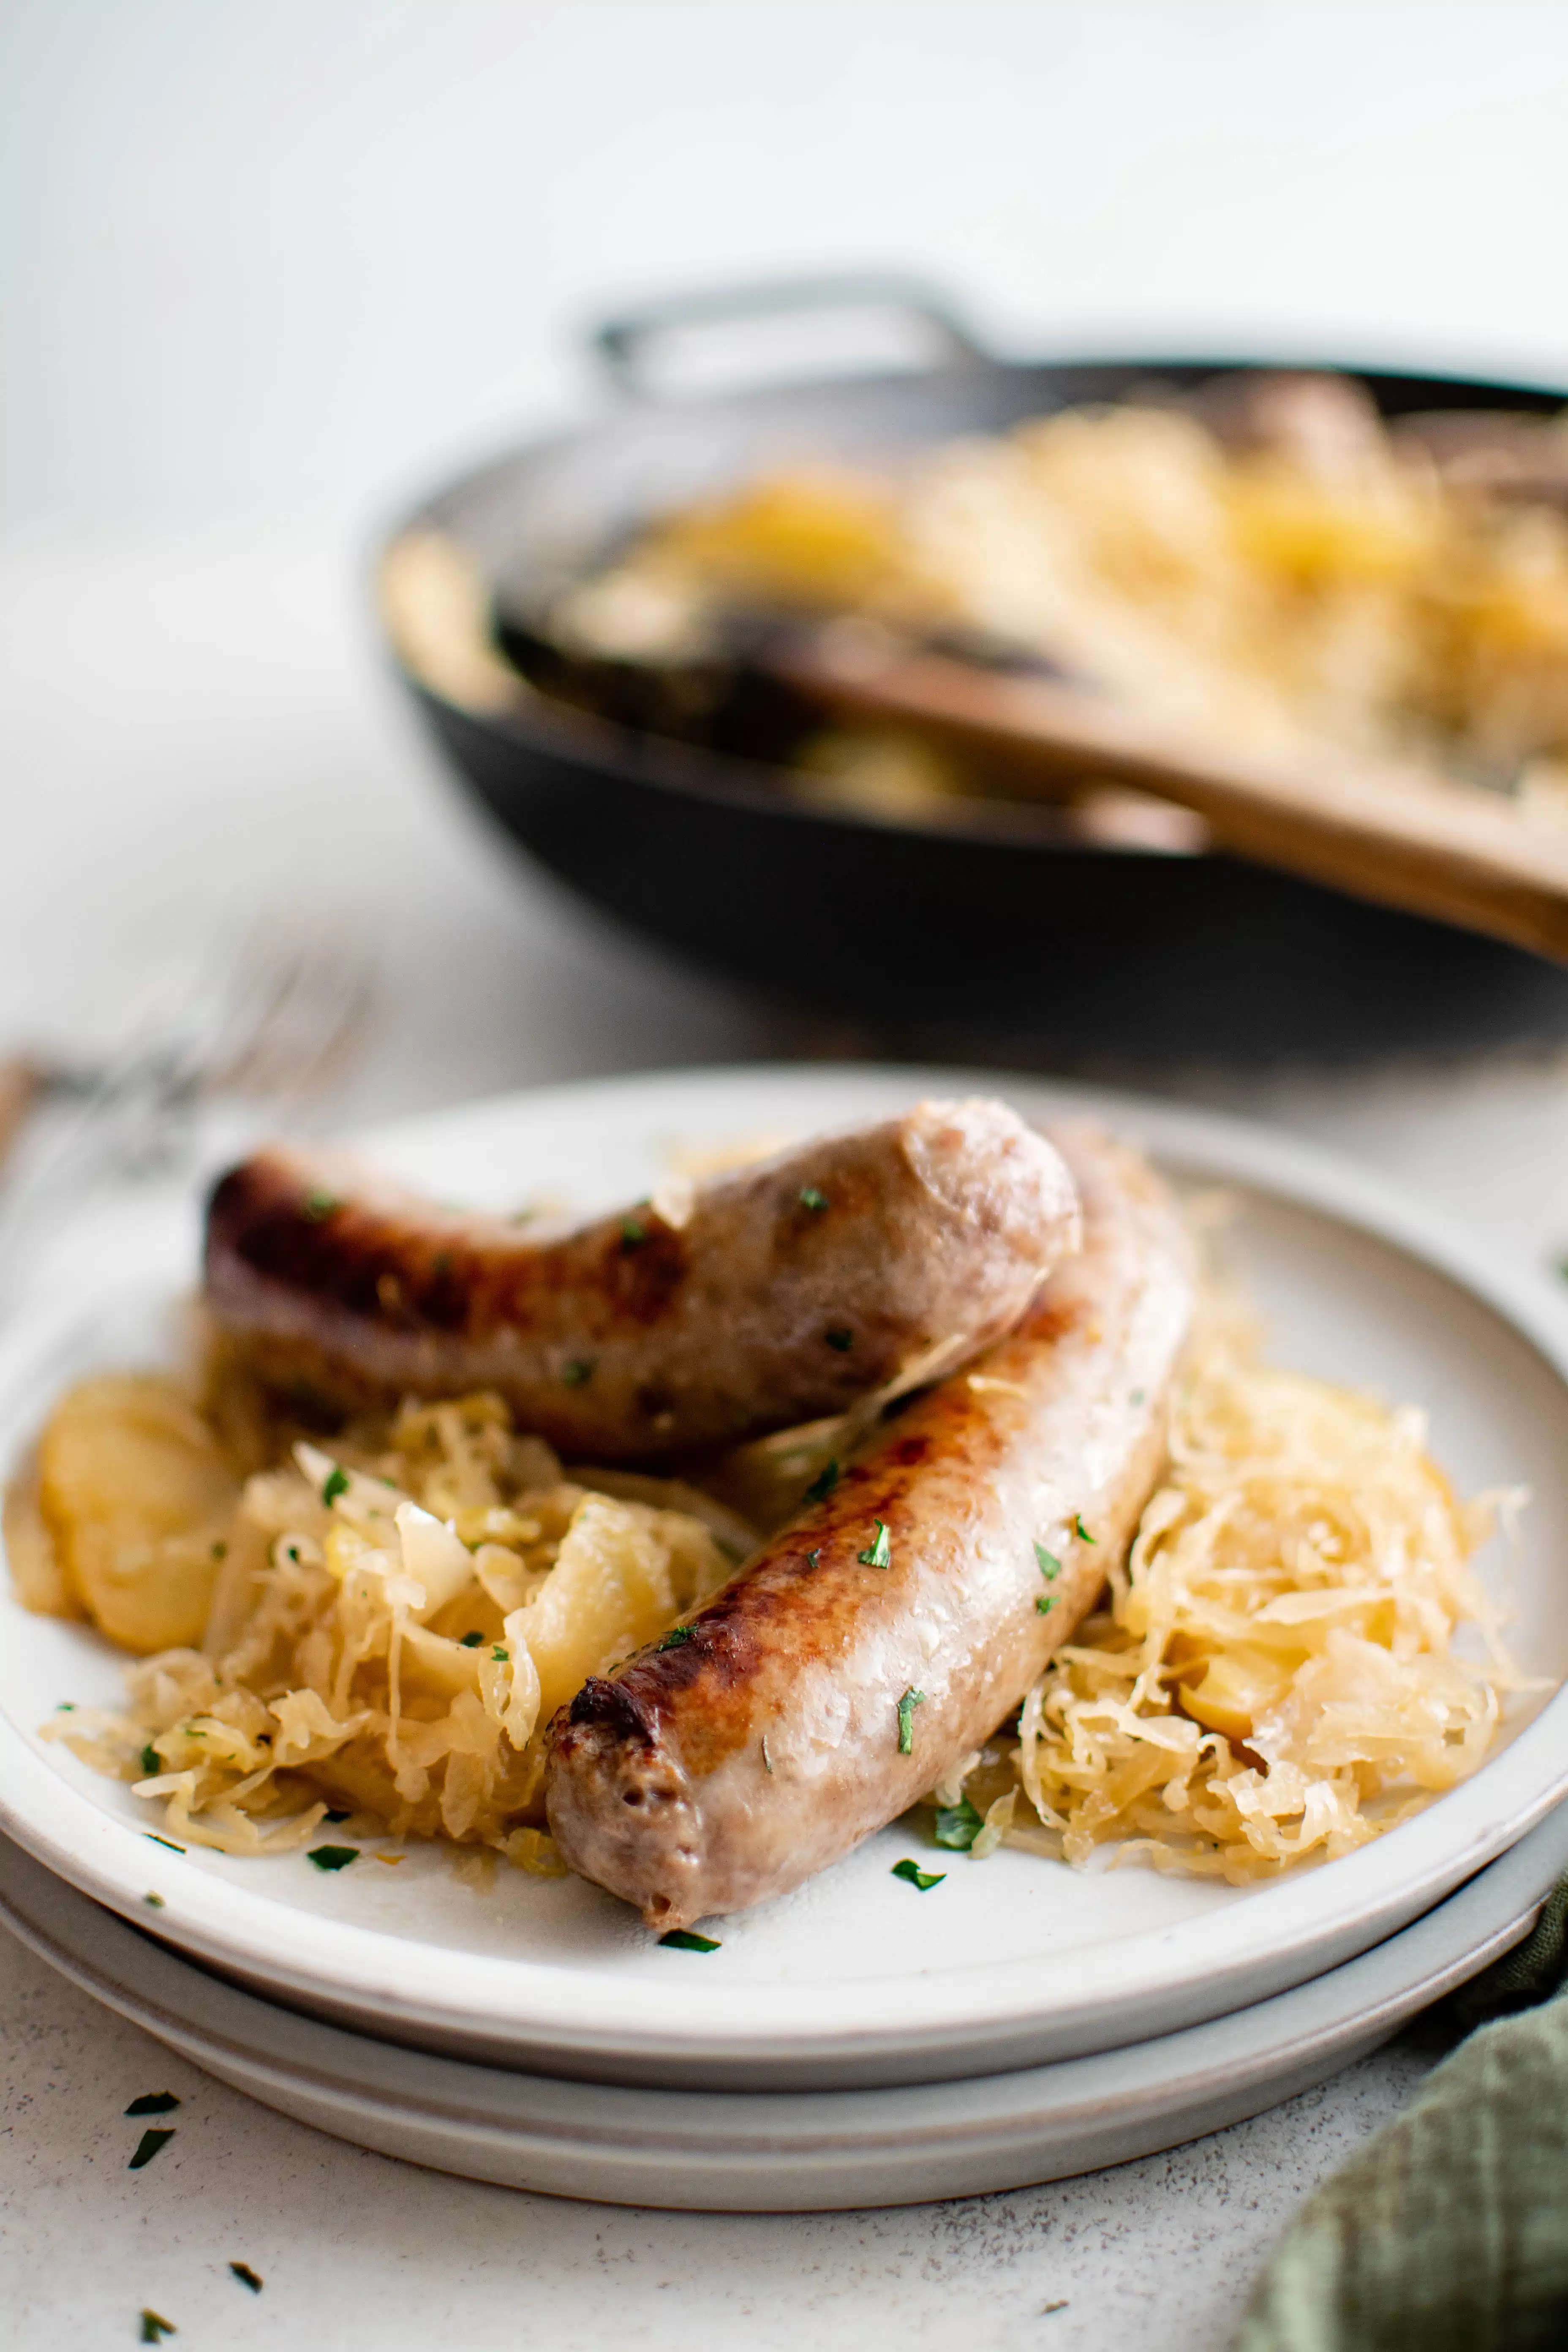 Two juicy bratwurst nestled on top of a pile of sauerkraut sauteed and mixed together with apples and onions on a white plate.